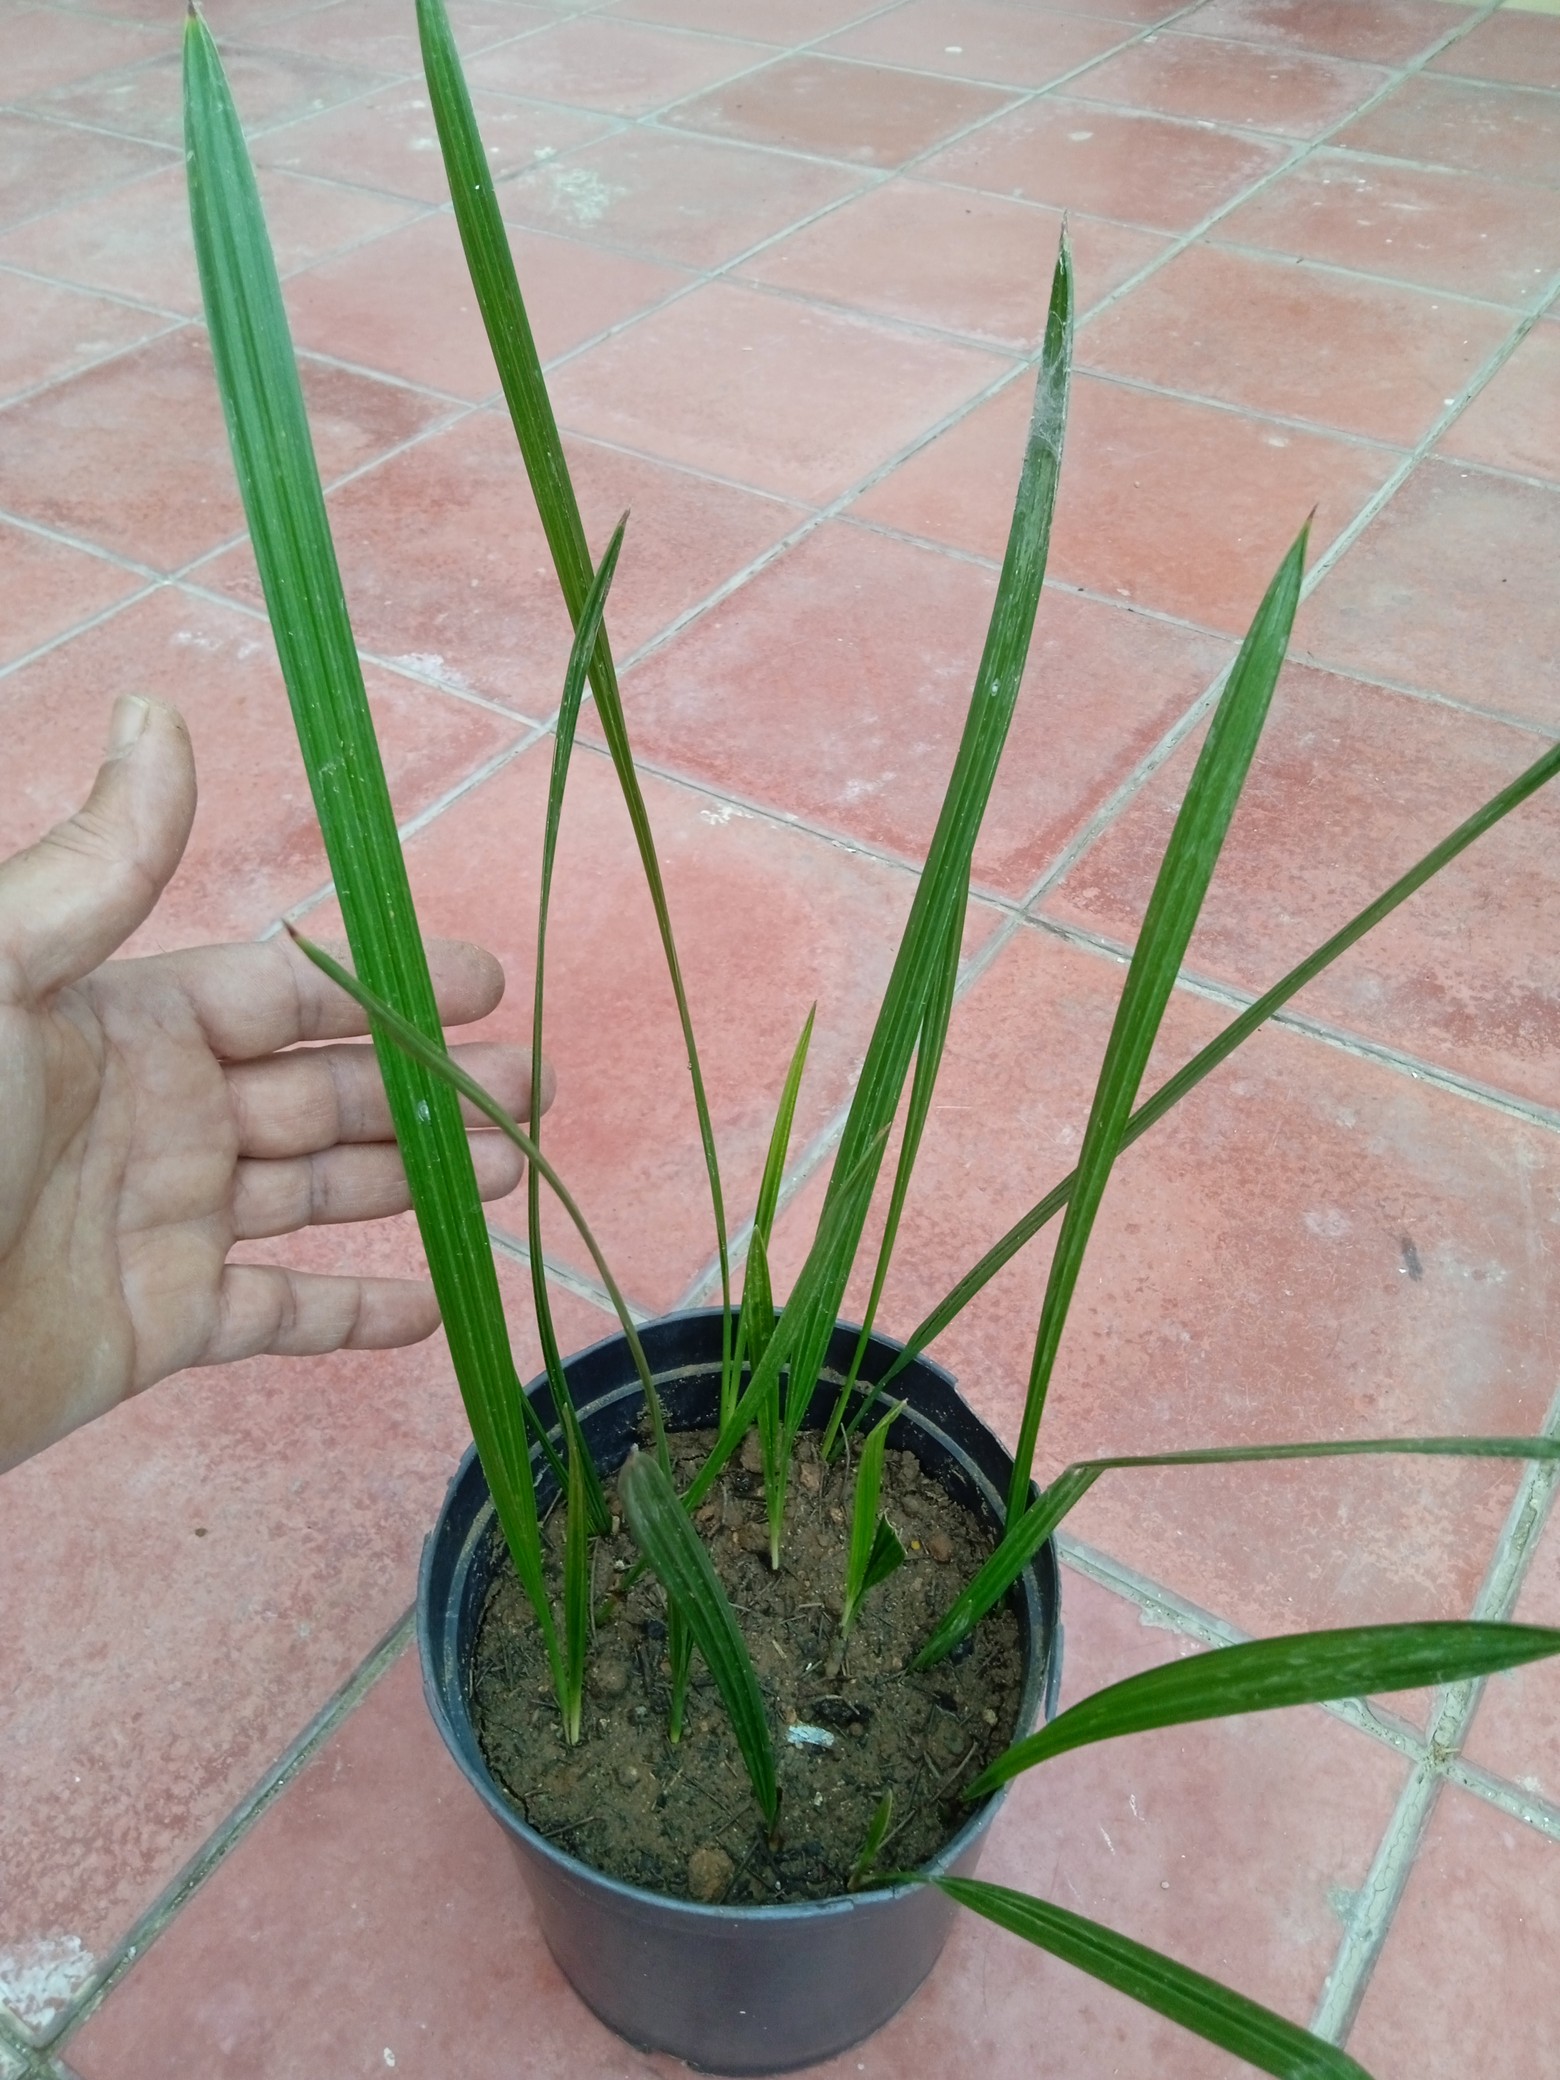 After palm seeds have germinated, the pot soon fills with seedlings. To avoid them to have compete against each other, they must be transplanted.